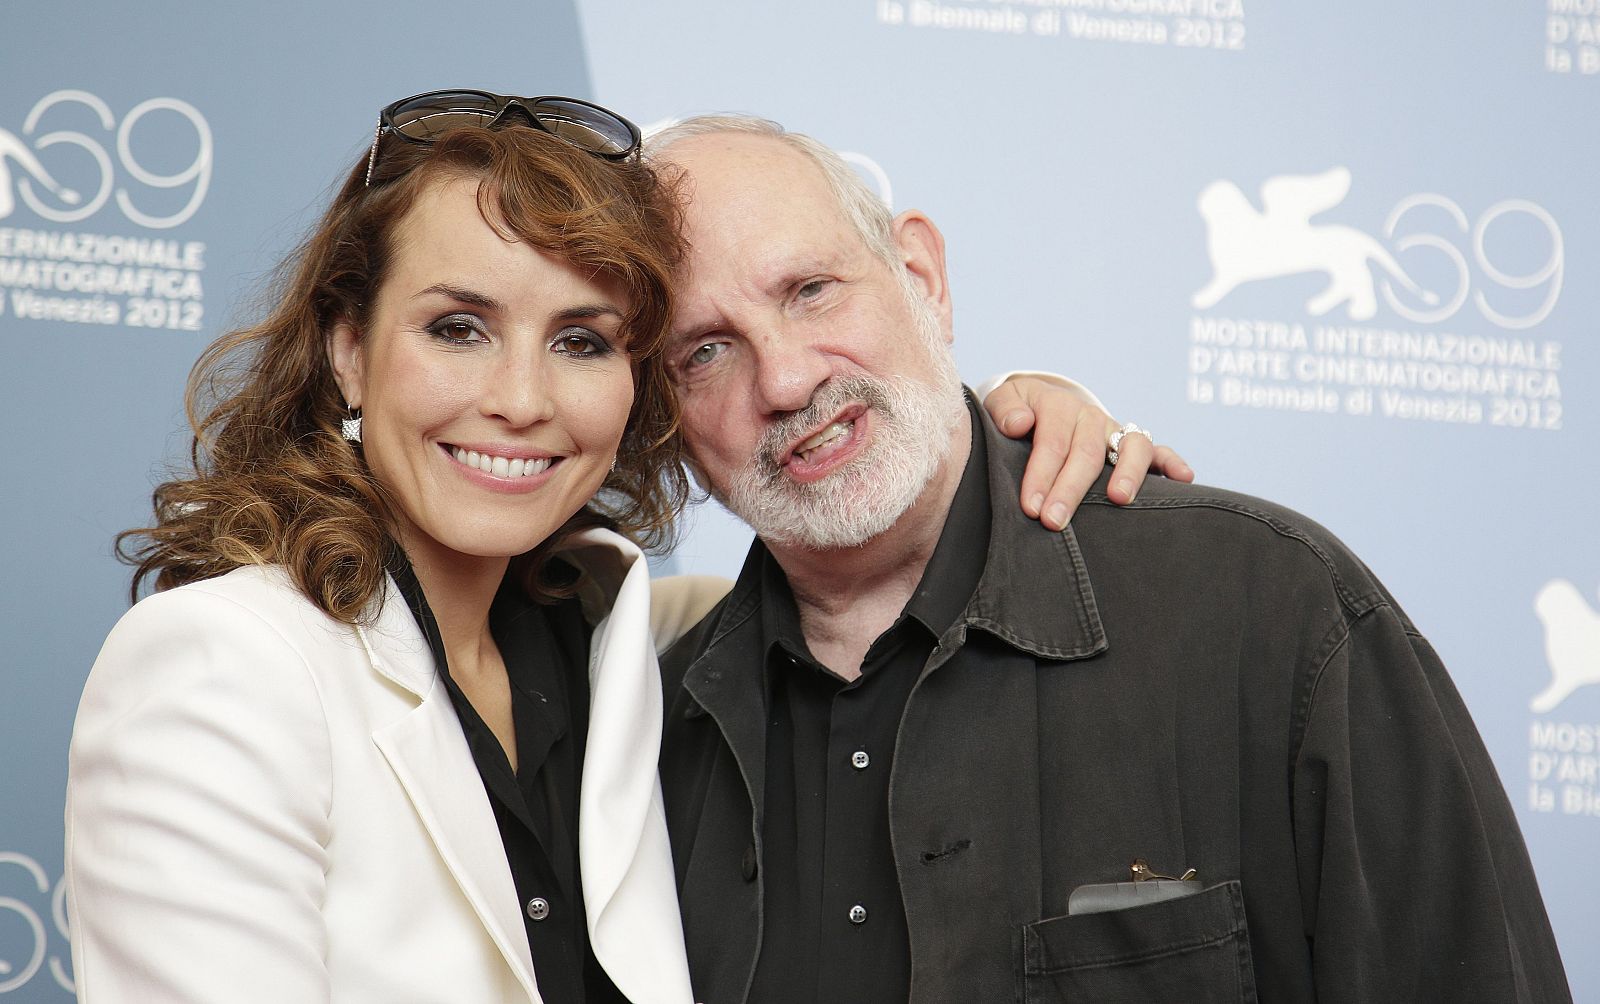 Director De Palma and actress Rapace pose during the photocall of the movie "Passion" at the 69th Venice Film Festival in Venice